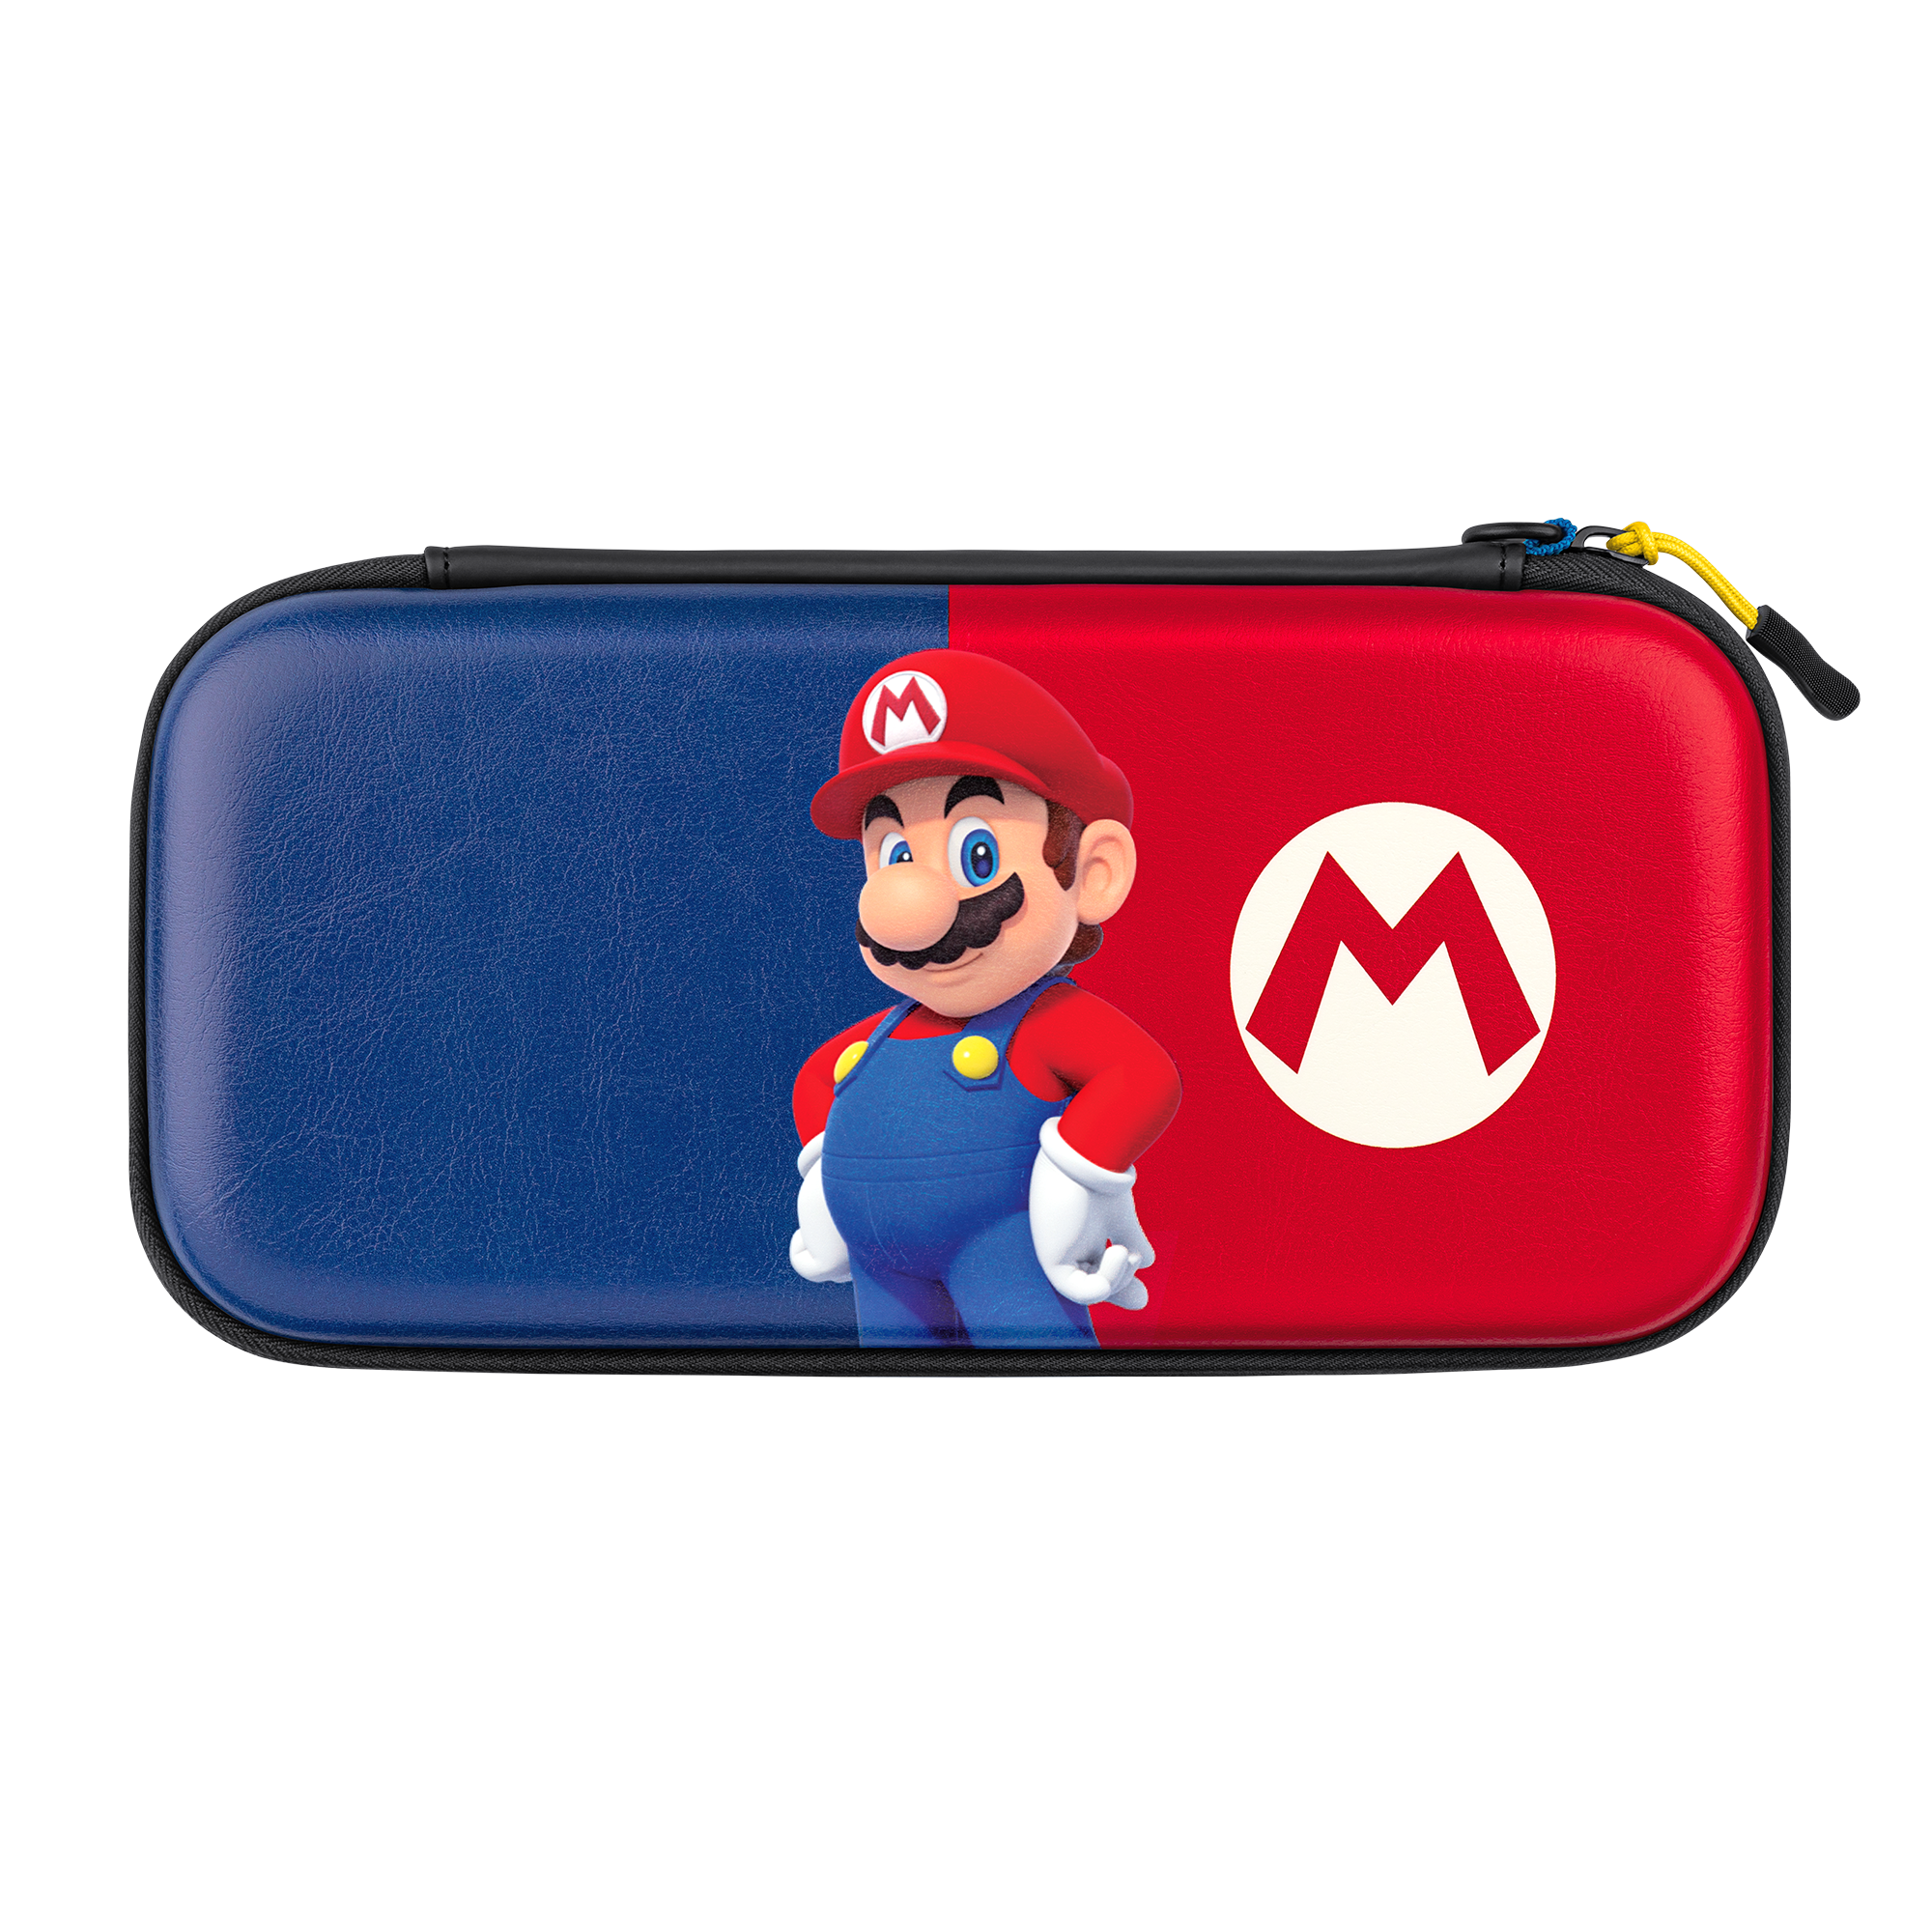 PDP Switch Deluxe Case Elite, Mario, Nintendo Switch - image 1 of 5